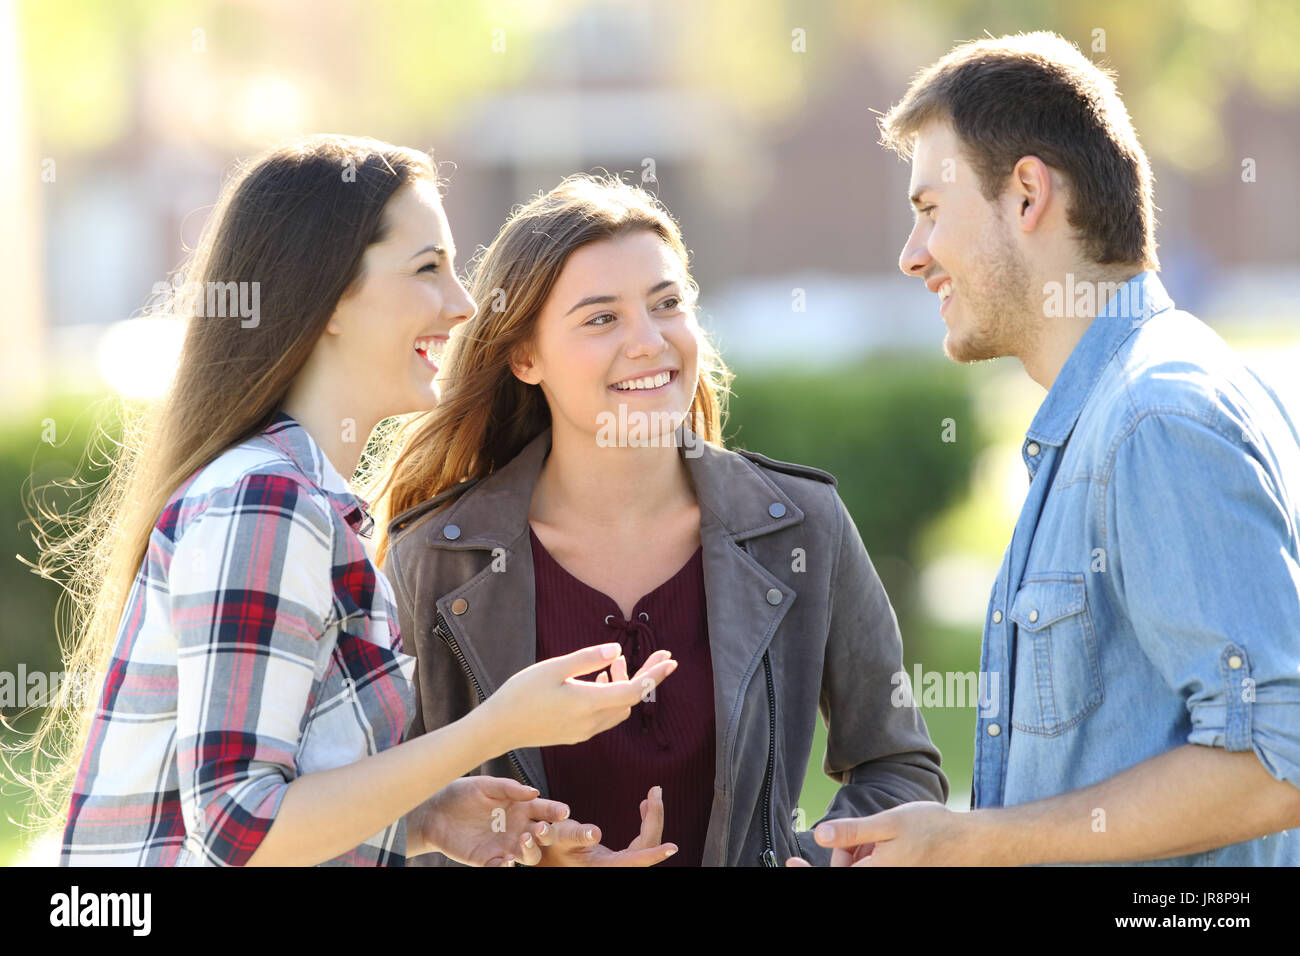 Three happy friends having a conversation and laughing in the street Stock Photo